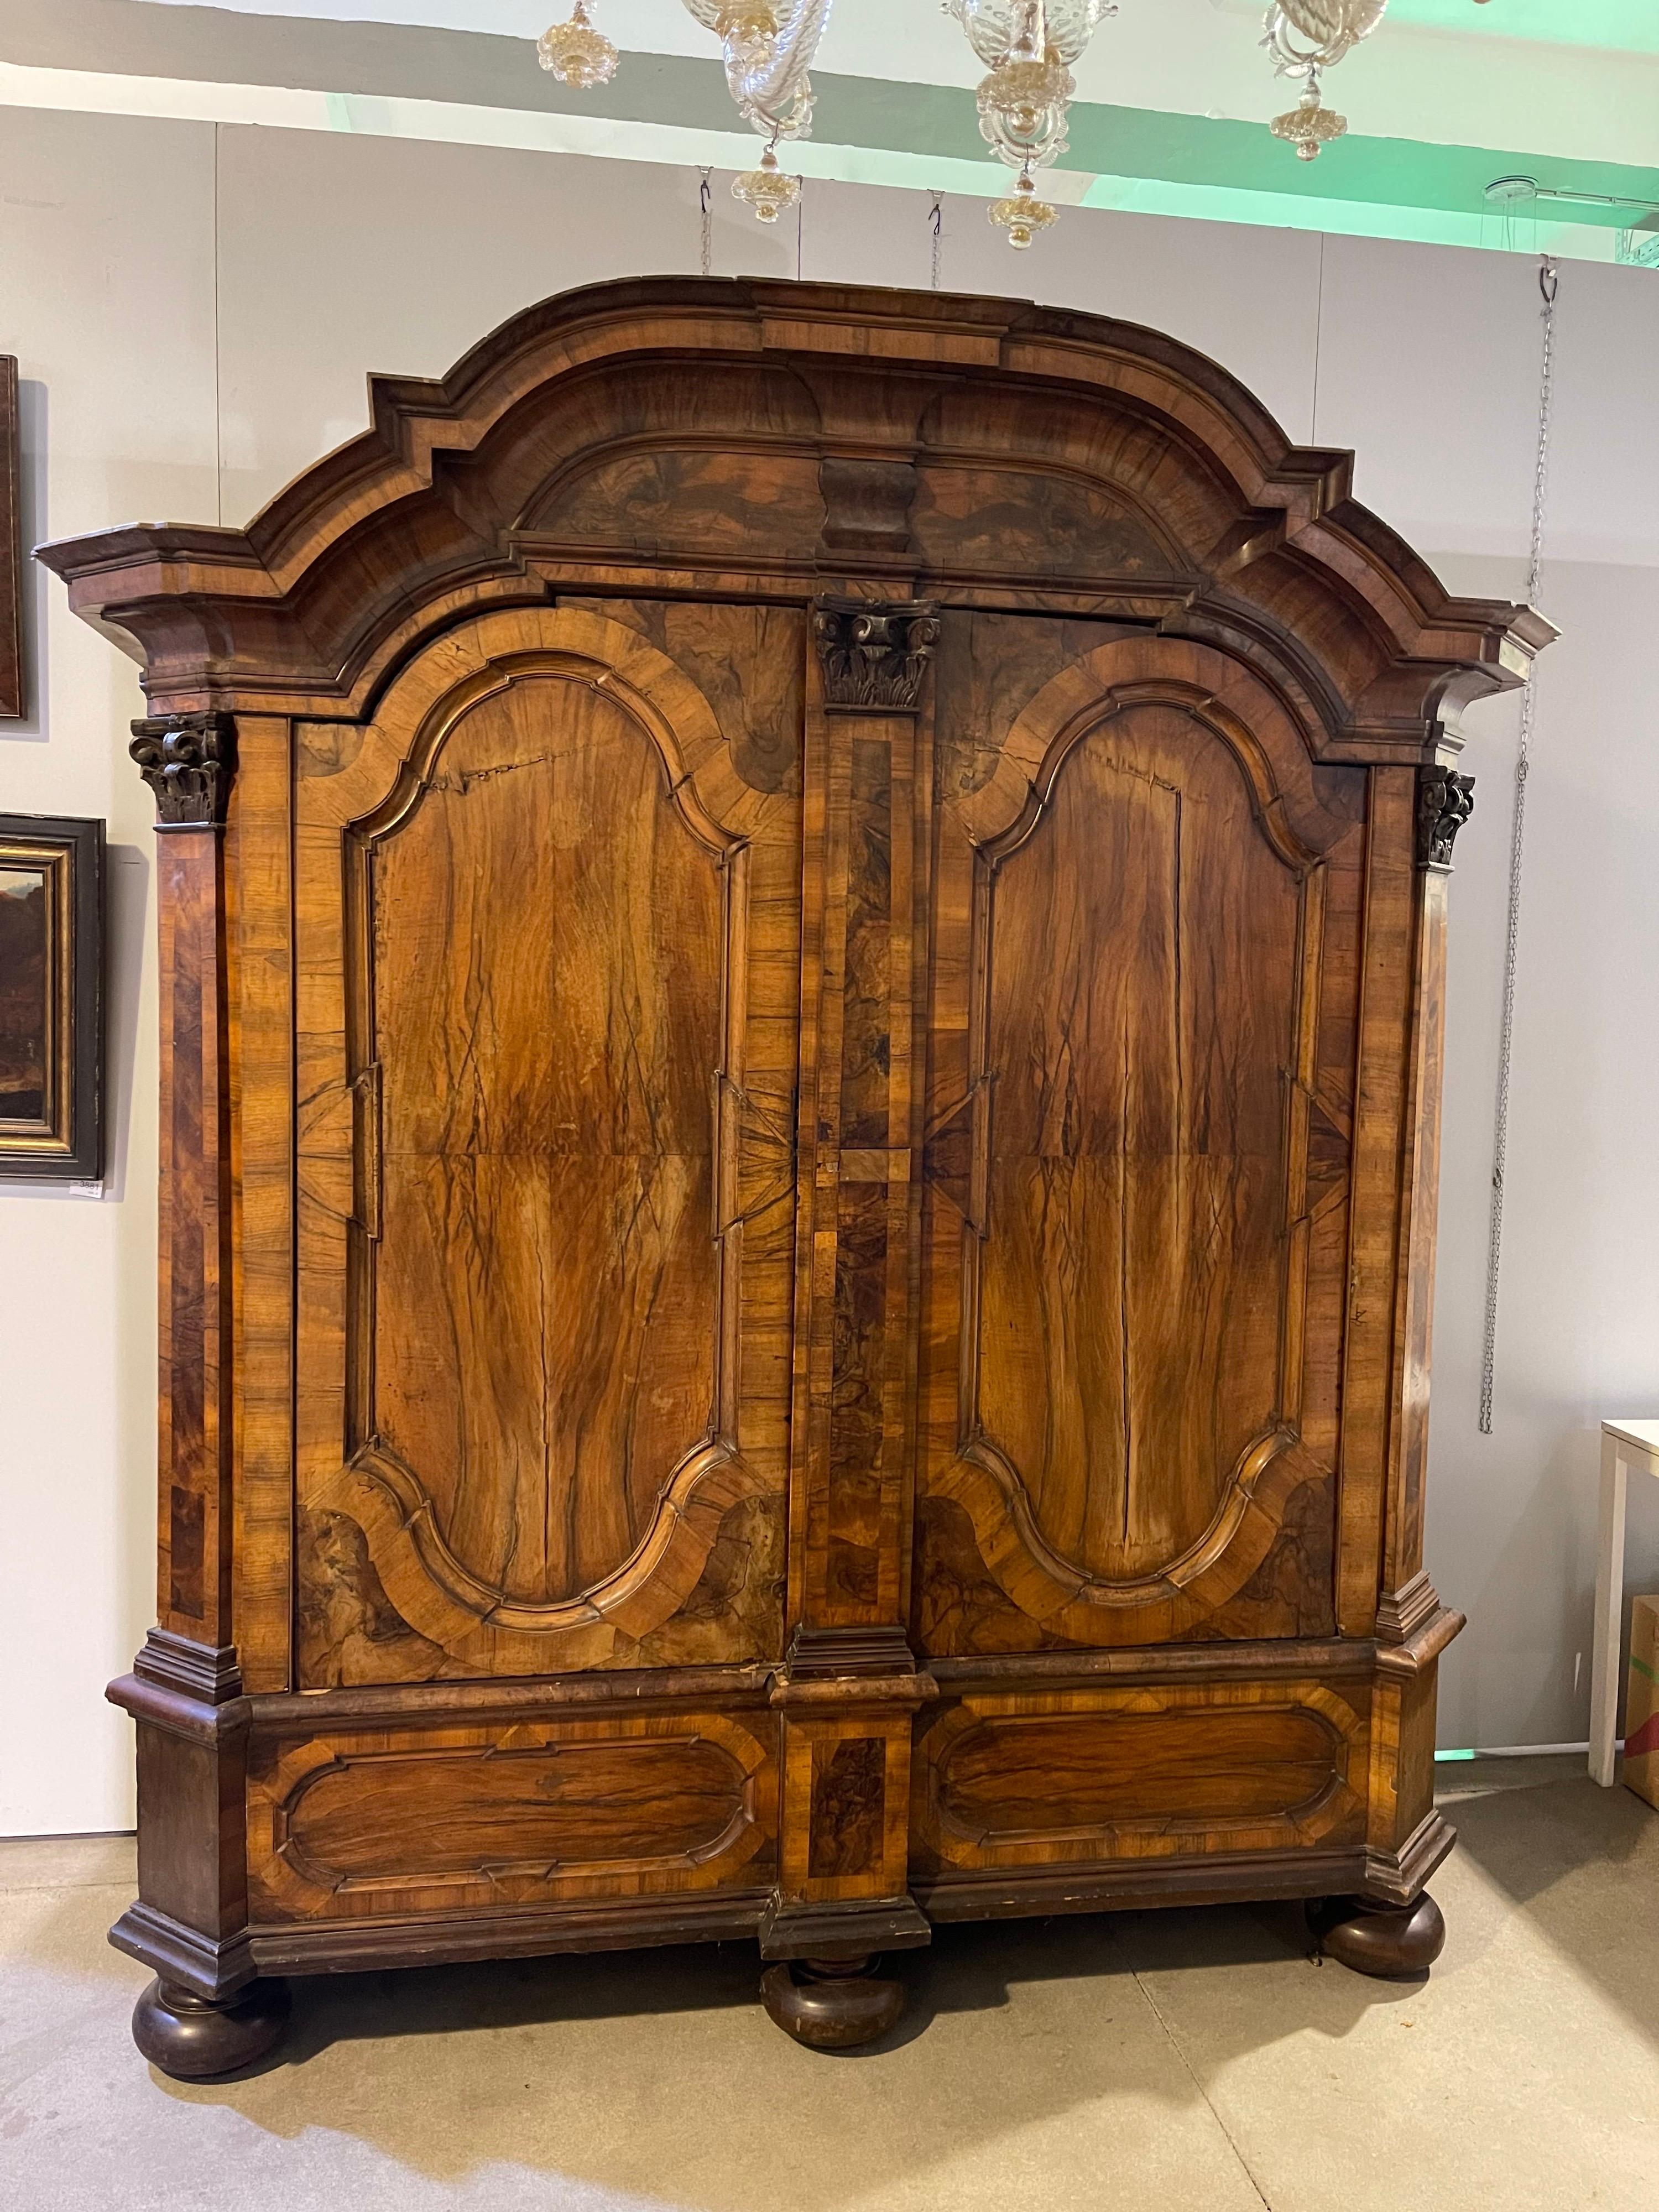 Walnut, veneered on oak. High, two-door body with panels and half-columns with carved capitals, on ball feet. Profiled gable wreath. Original iron box lock without key. Signs of age and use. Probably West Germany in Mainz, mid-18th century. Approx.